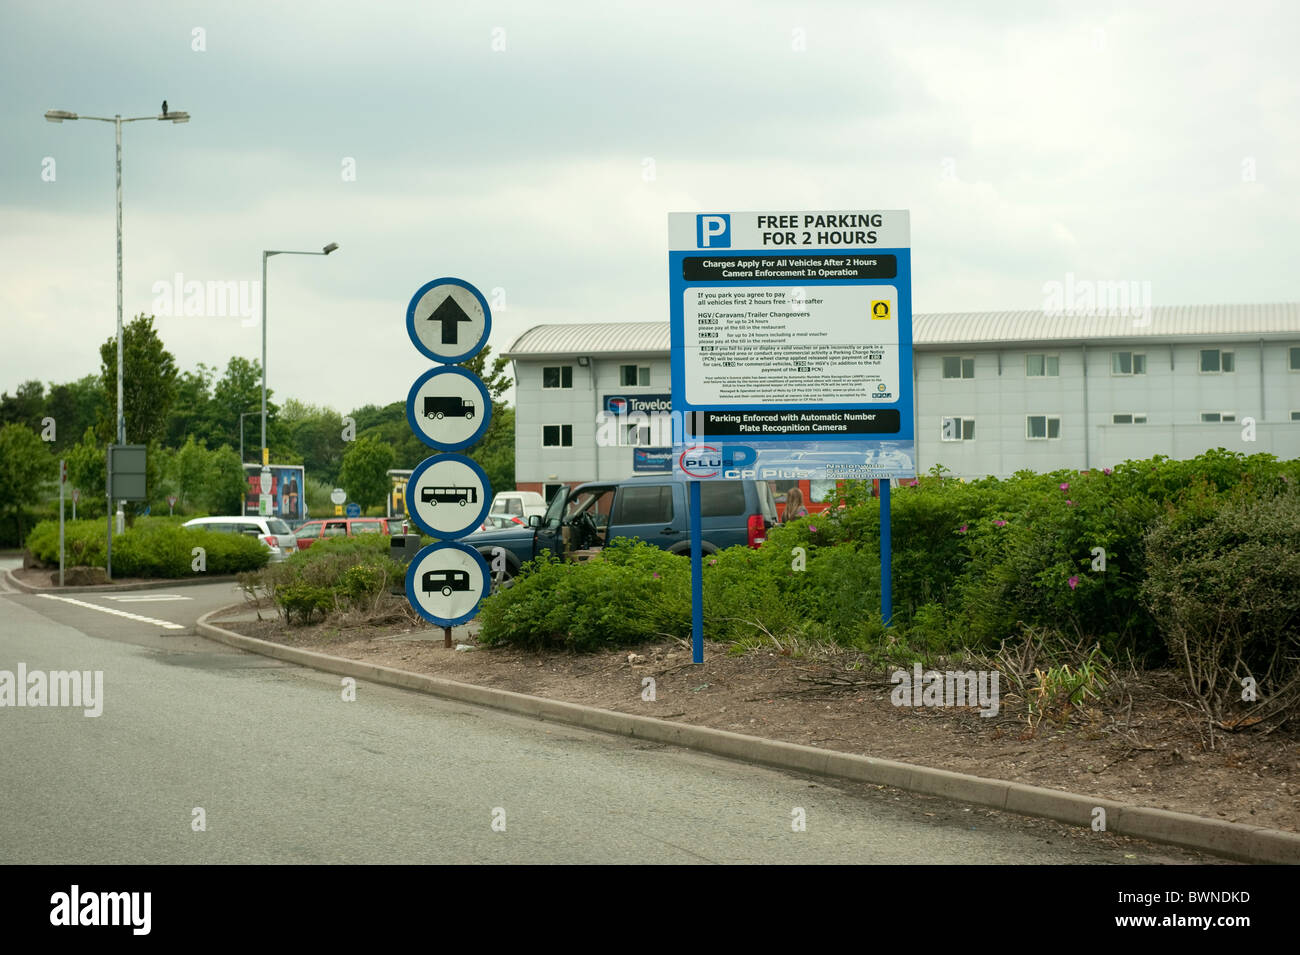 Motorway Services with Travelodge showing Parking Regulations Stock Photo